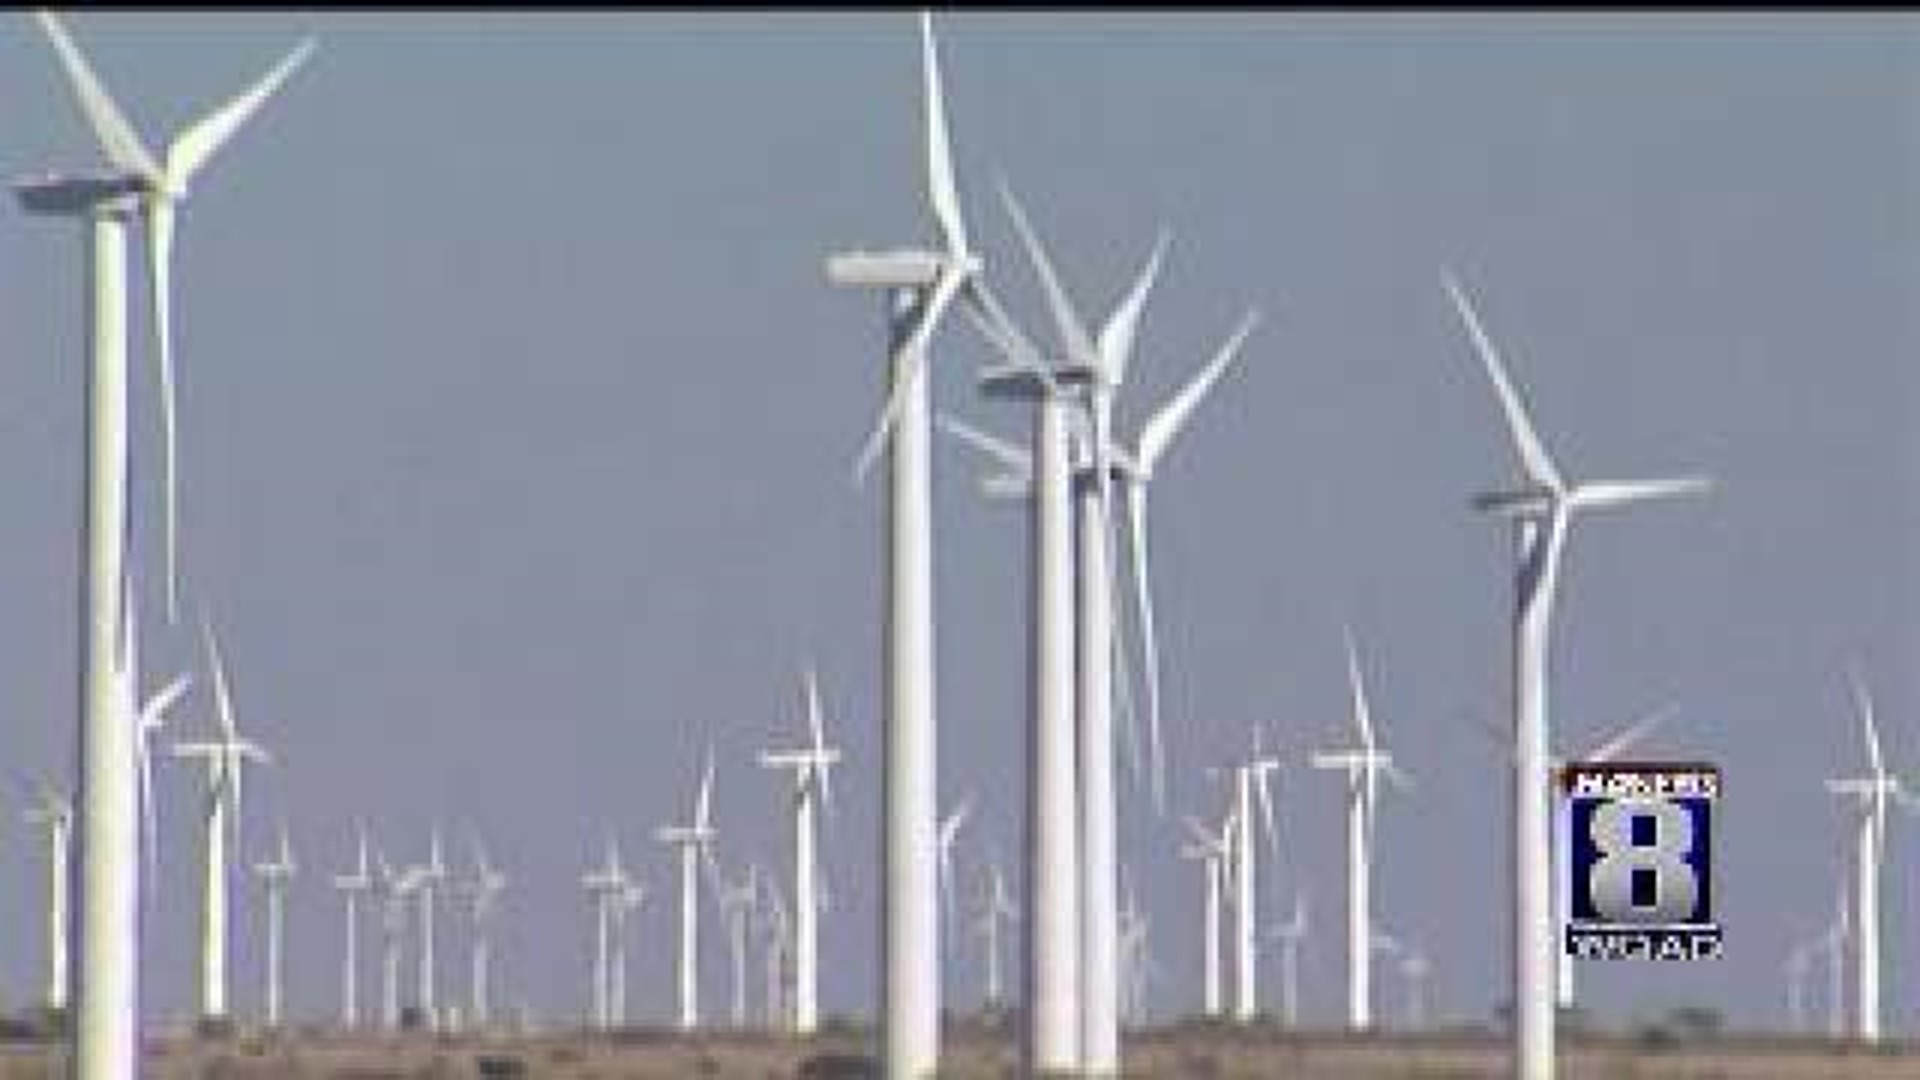 Businesses worry about wind energy